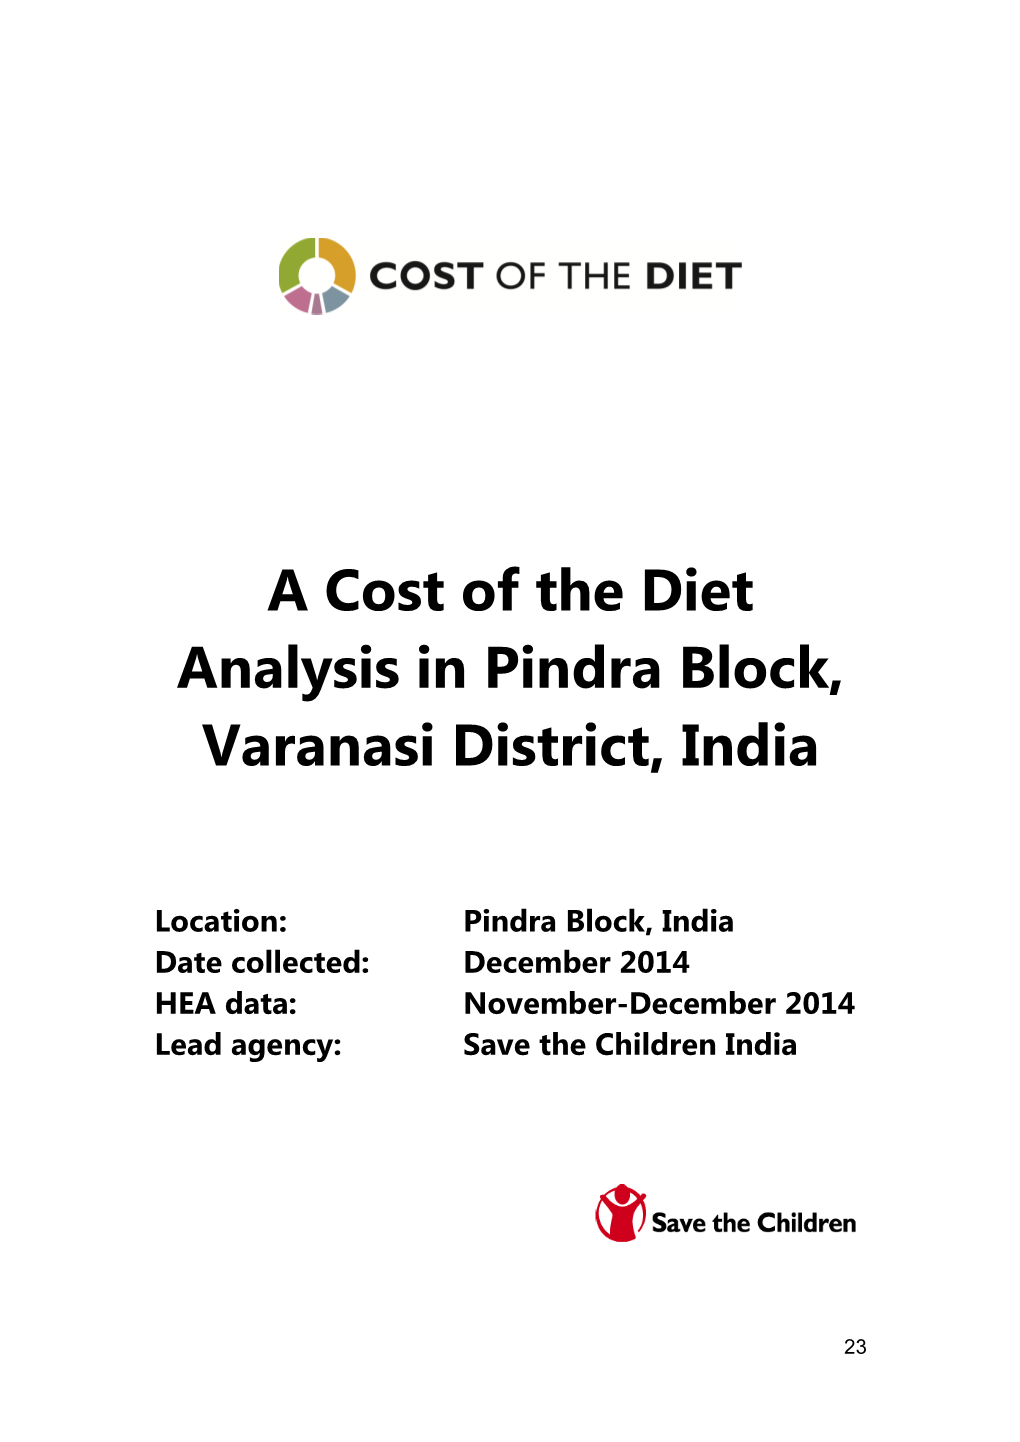 A Cost of the Diet Analysis in Pindra Block, Varanasi District, India